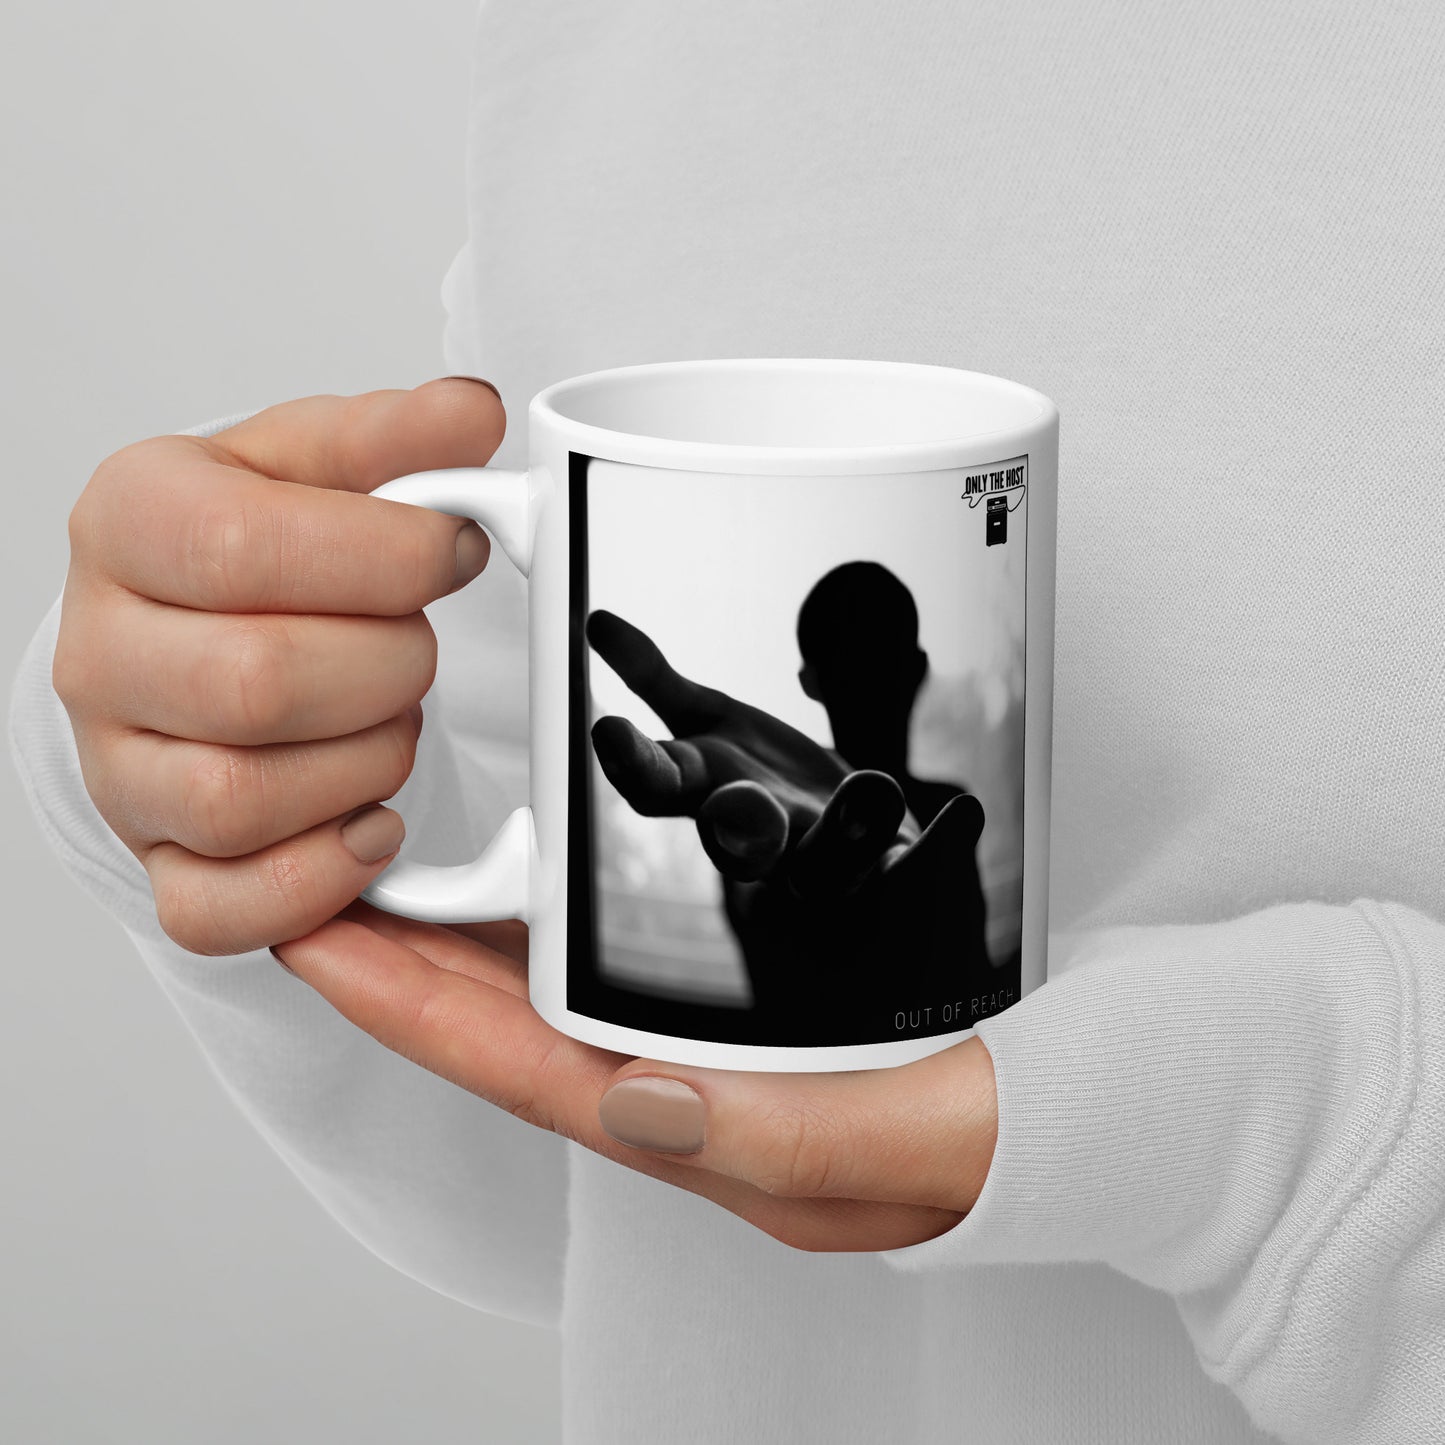 Only The Host - Out Of Reach White Glossy Mug